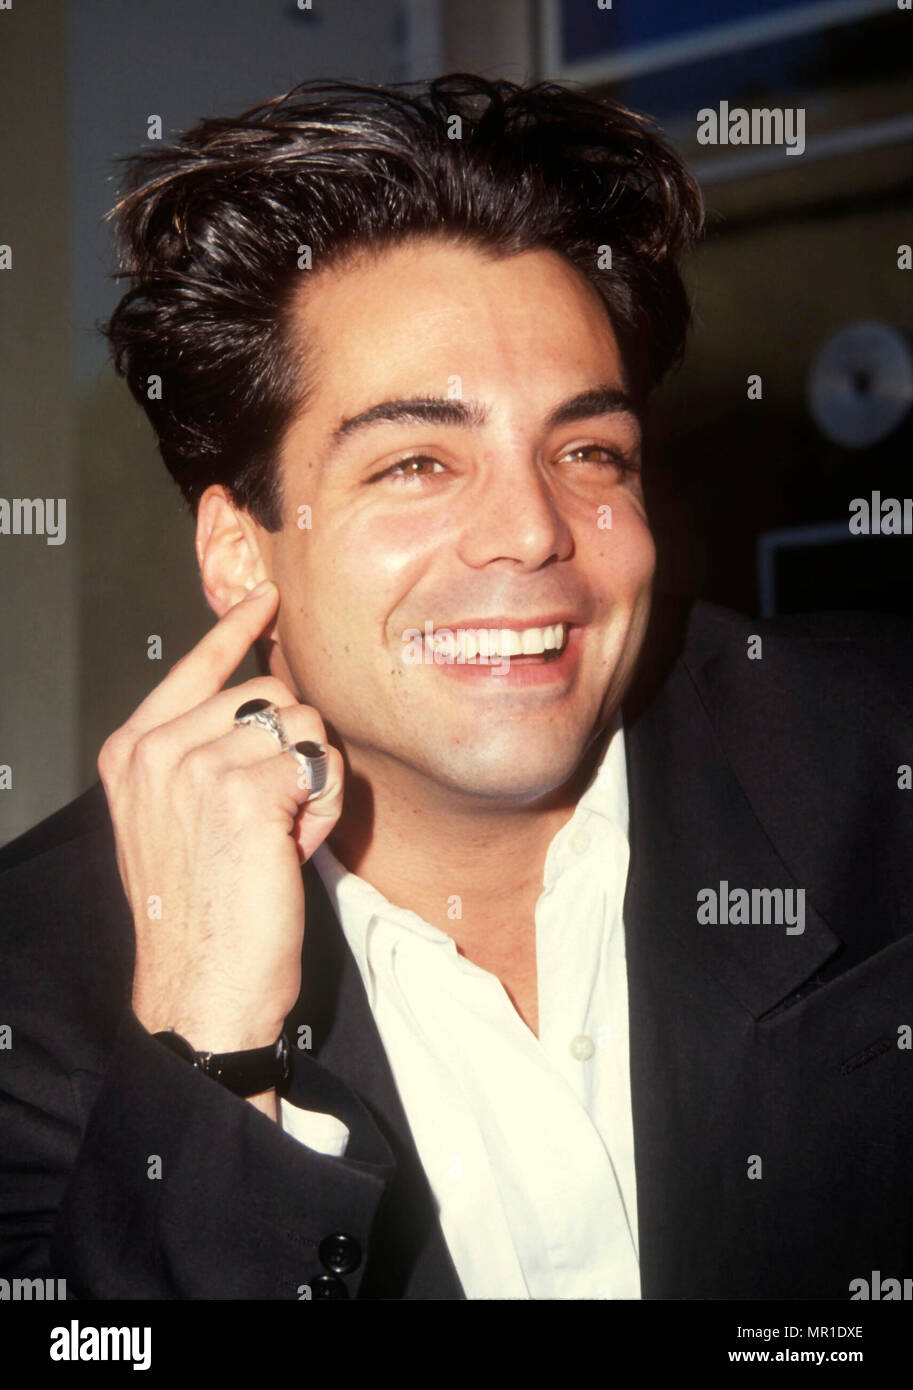 WESTWOOD, CA - MARCH 9:  Actor Richard Grieco attends the 'If Looks Could Kill' Westwood Premiere on March 9, 1991 at Mann PlazaTheatre in Westwood, California. Photo by Barry King/Alamy Stock Photo Stock Photo